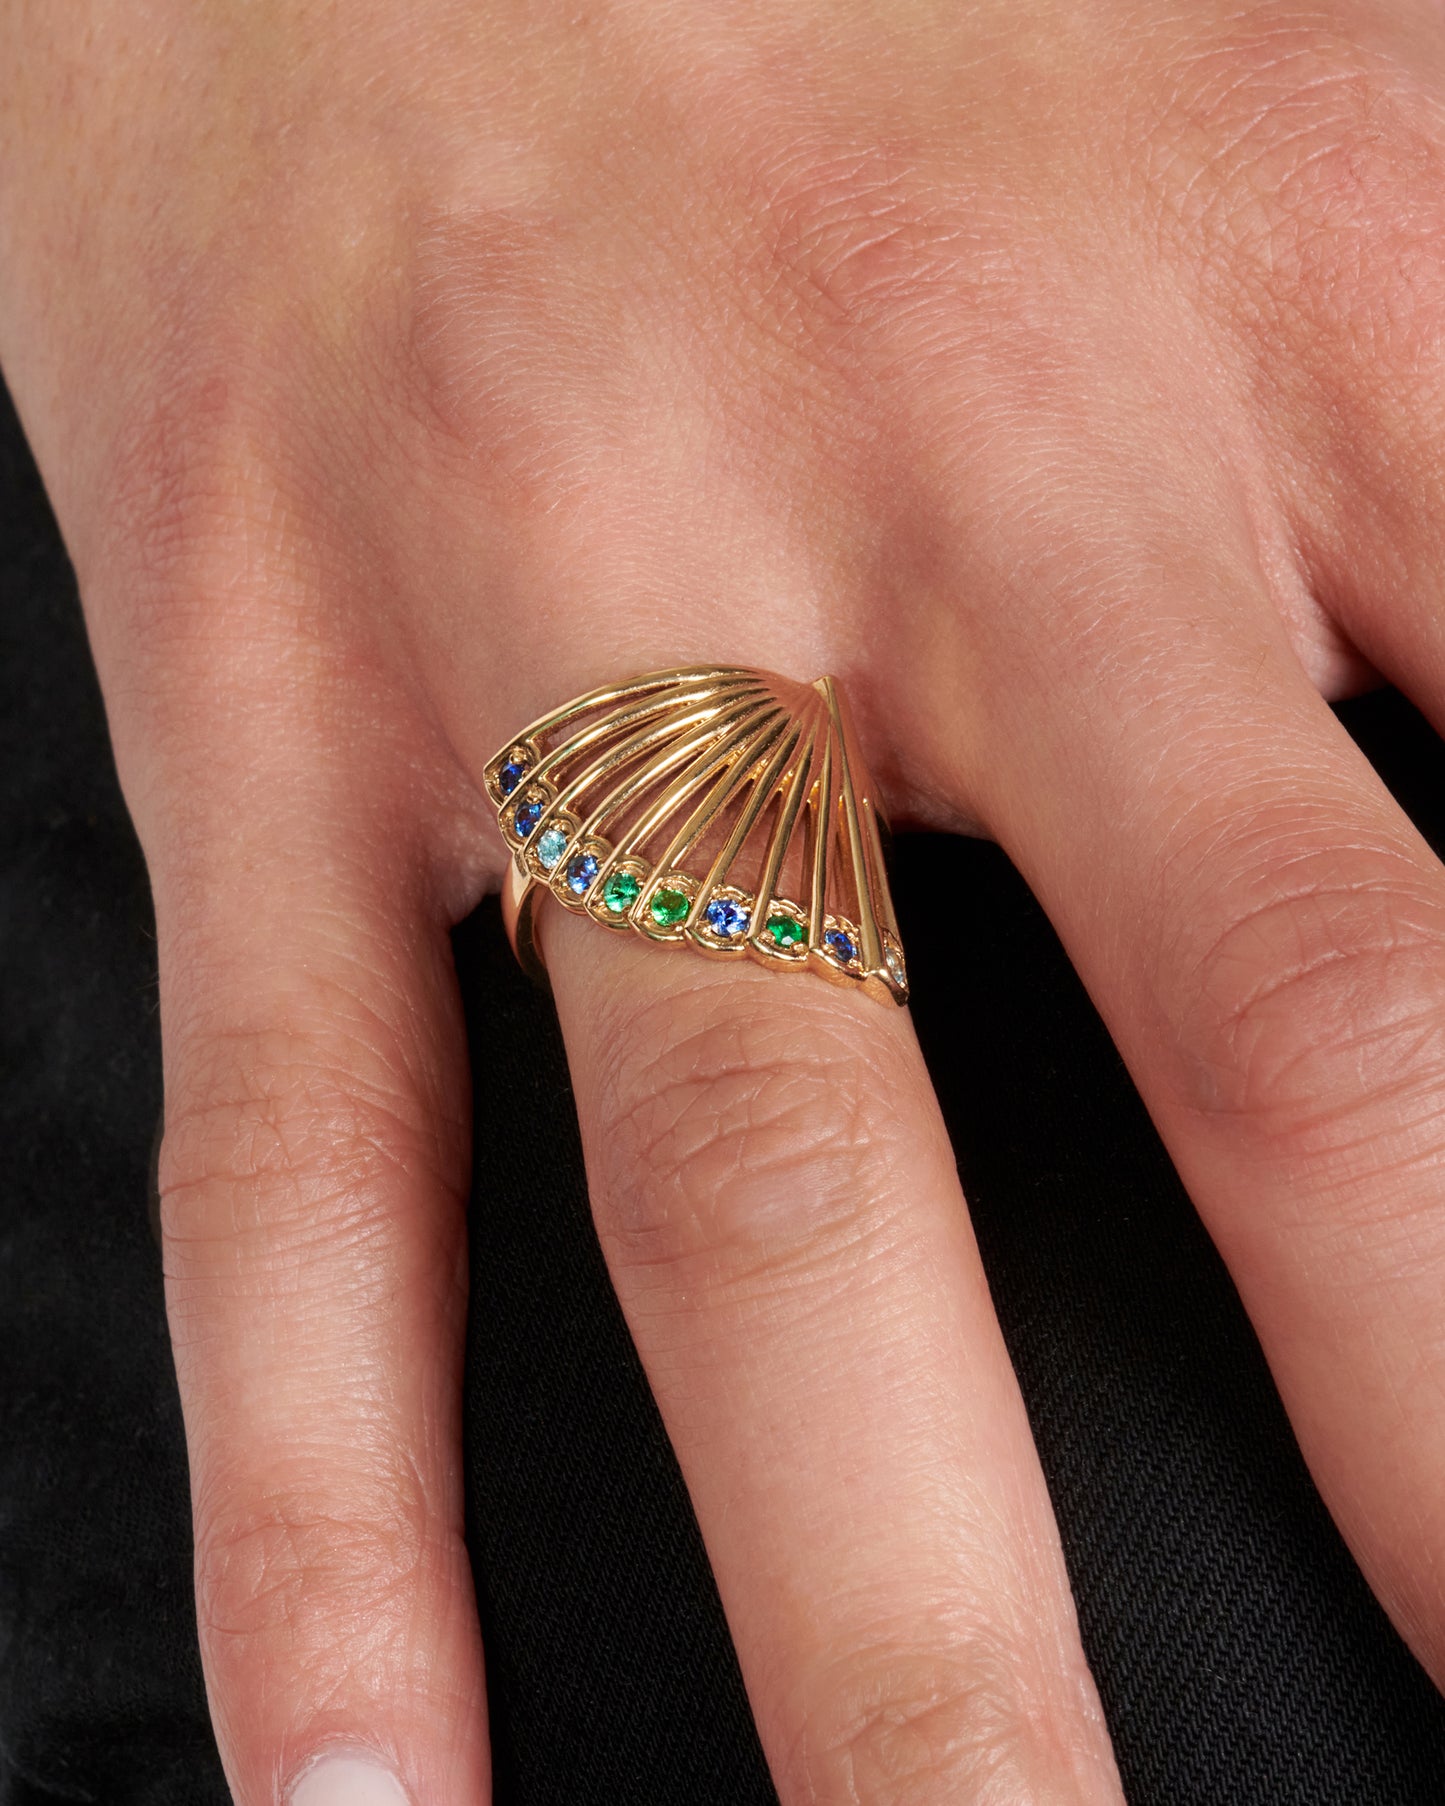 This incredible ring, modeled after the shape of a fan, features bright stones along the edge.